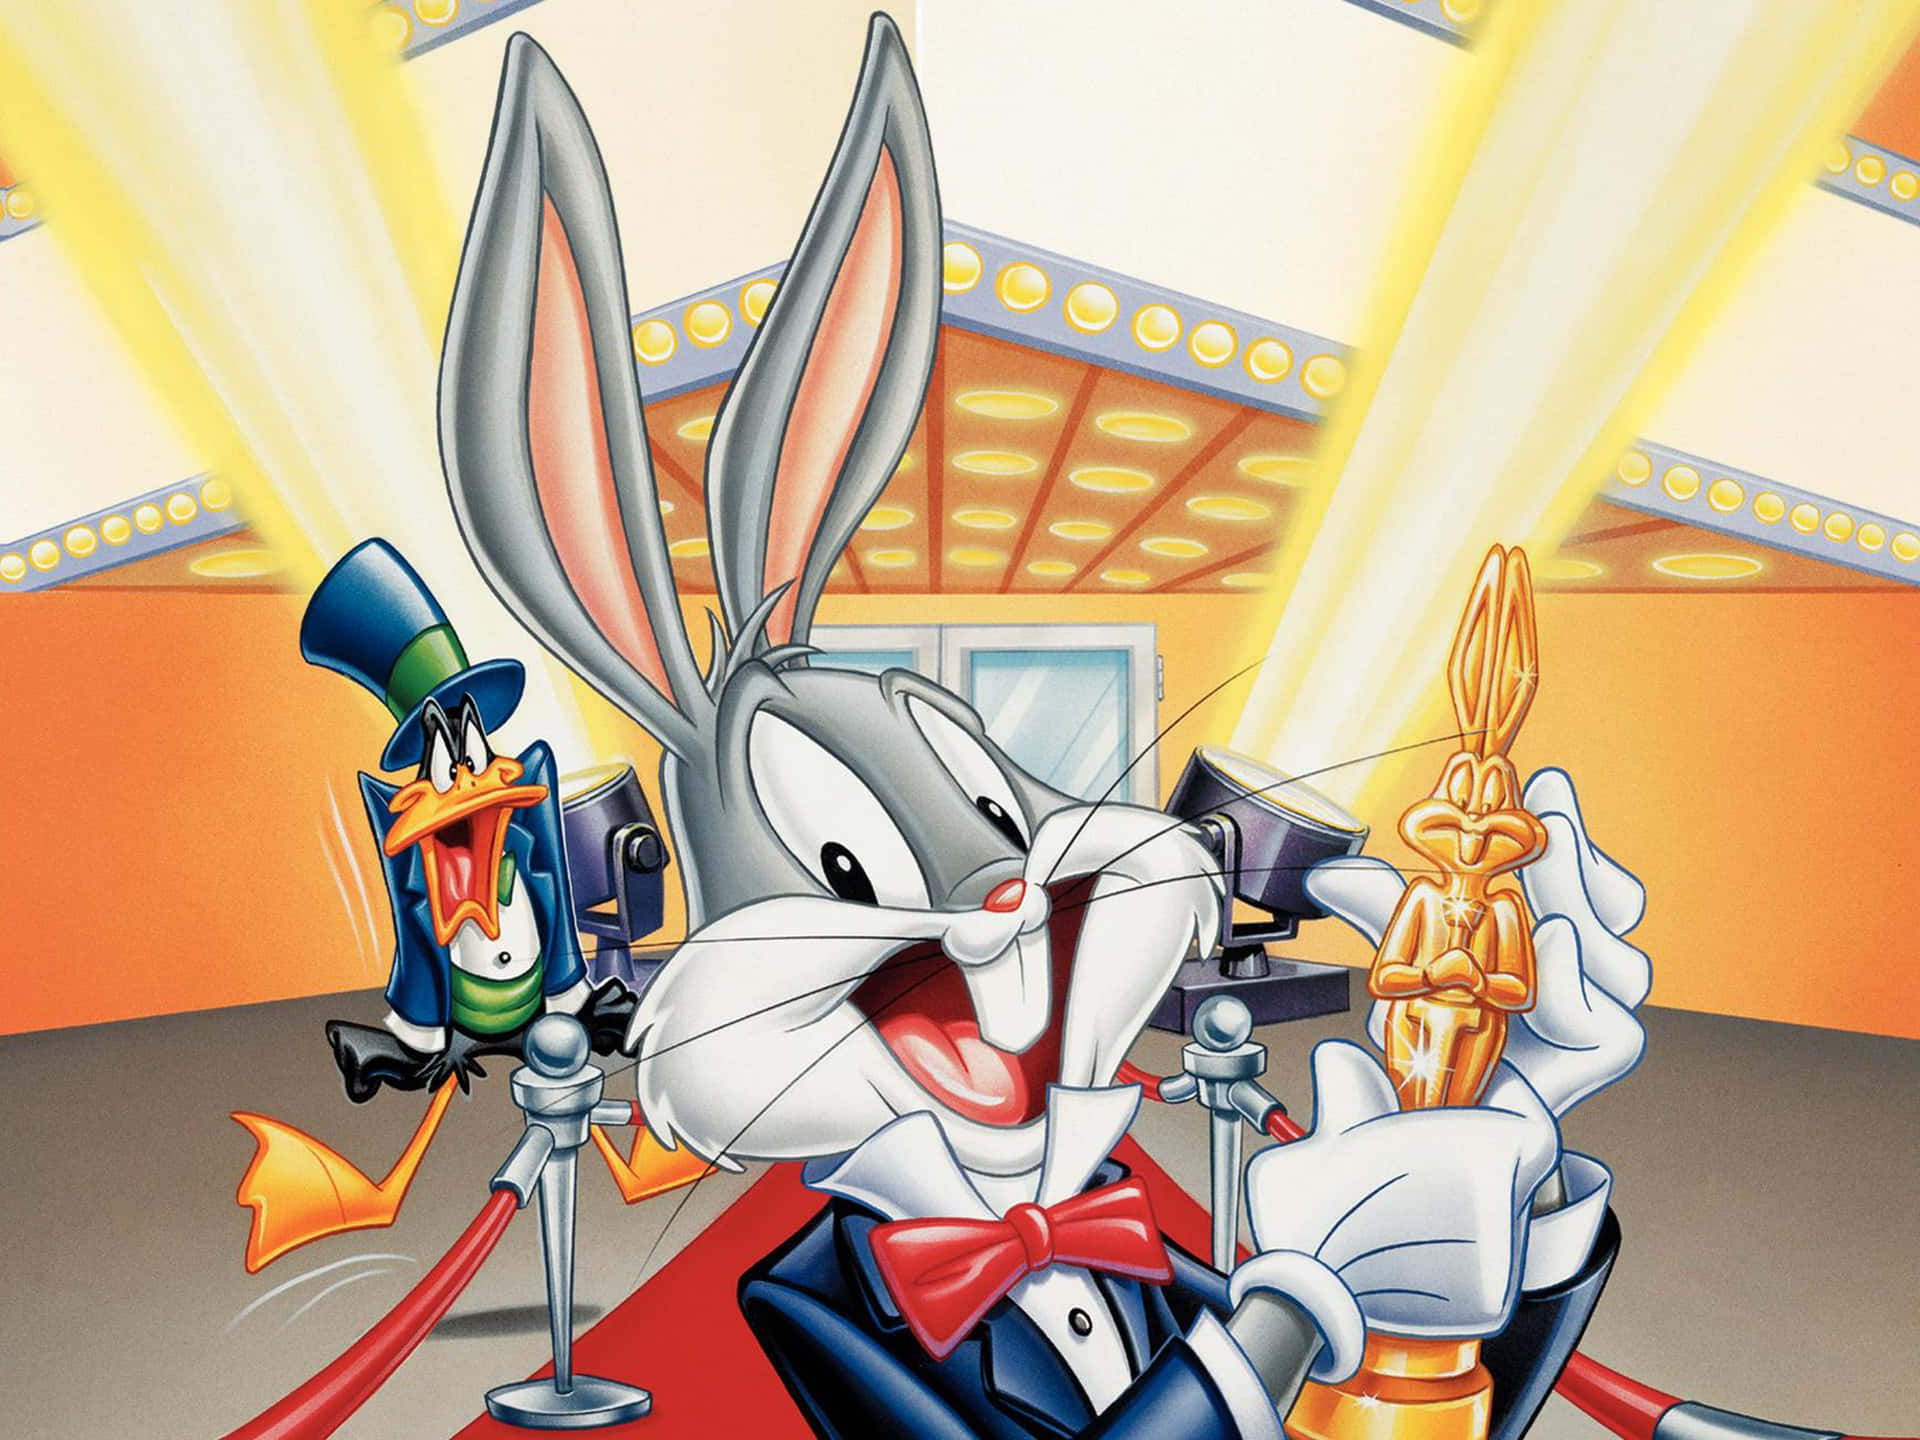 Cool Bugs Bunny Receives Trophy Wallpaper